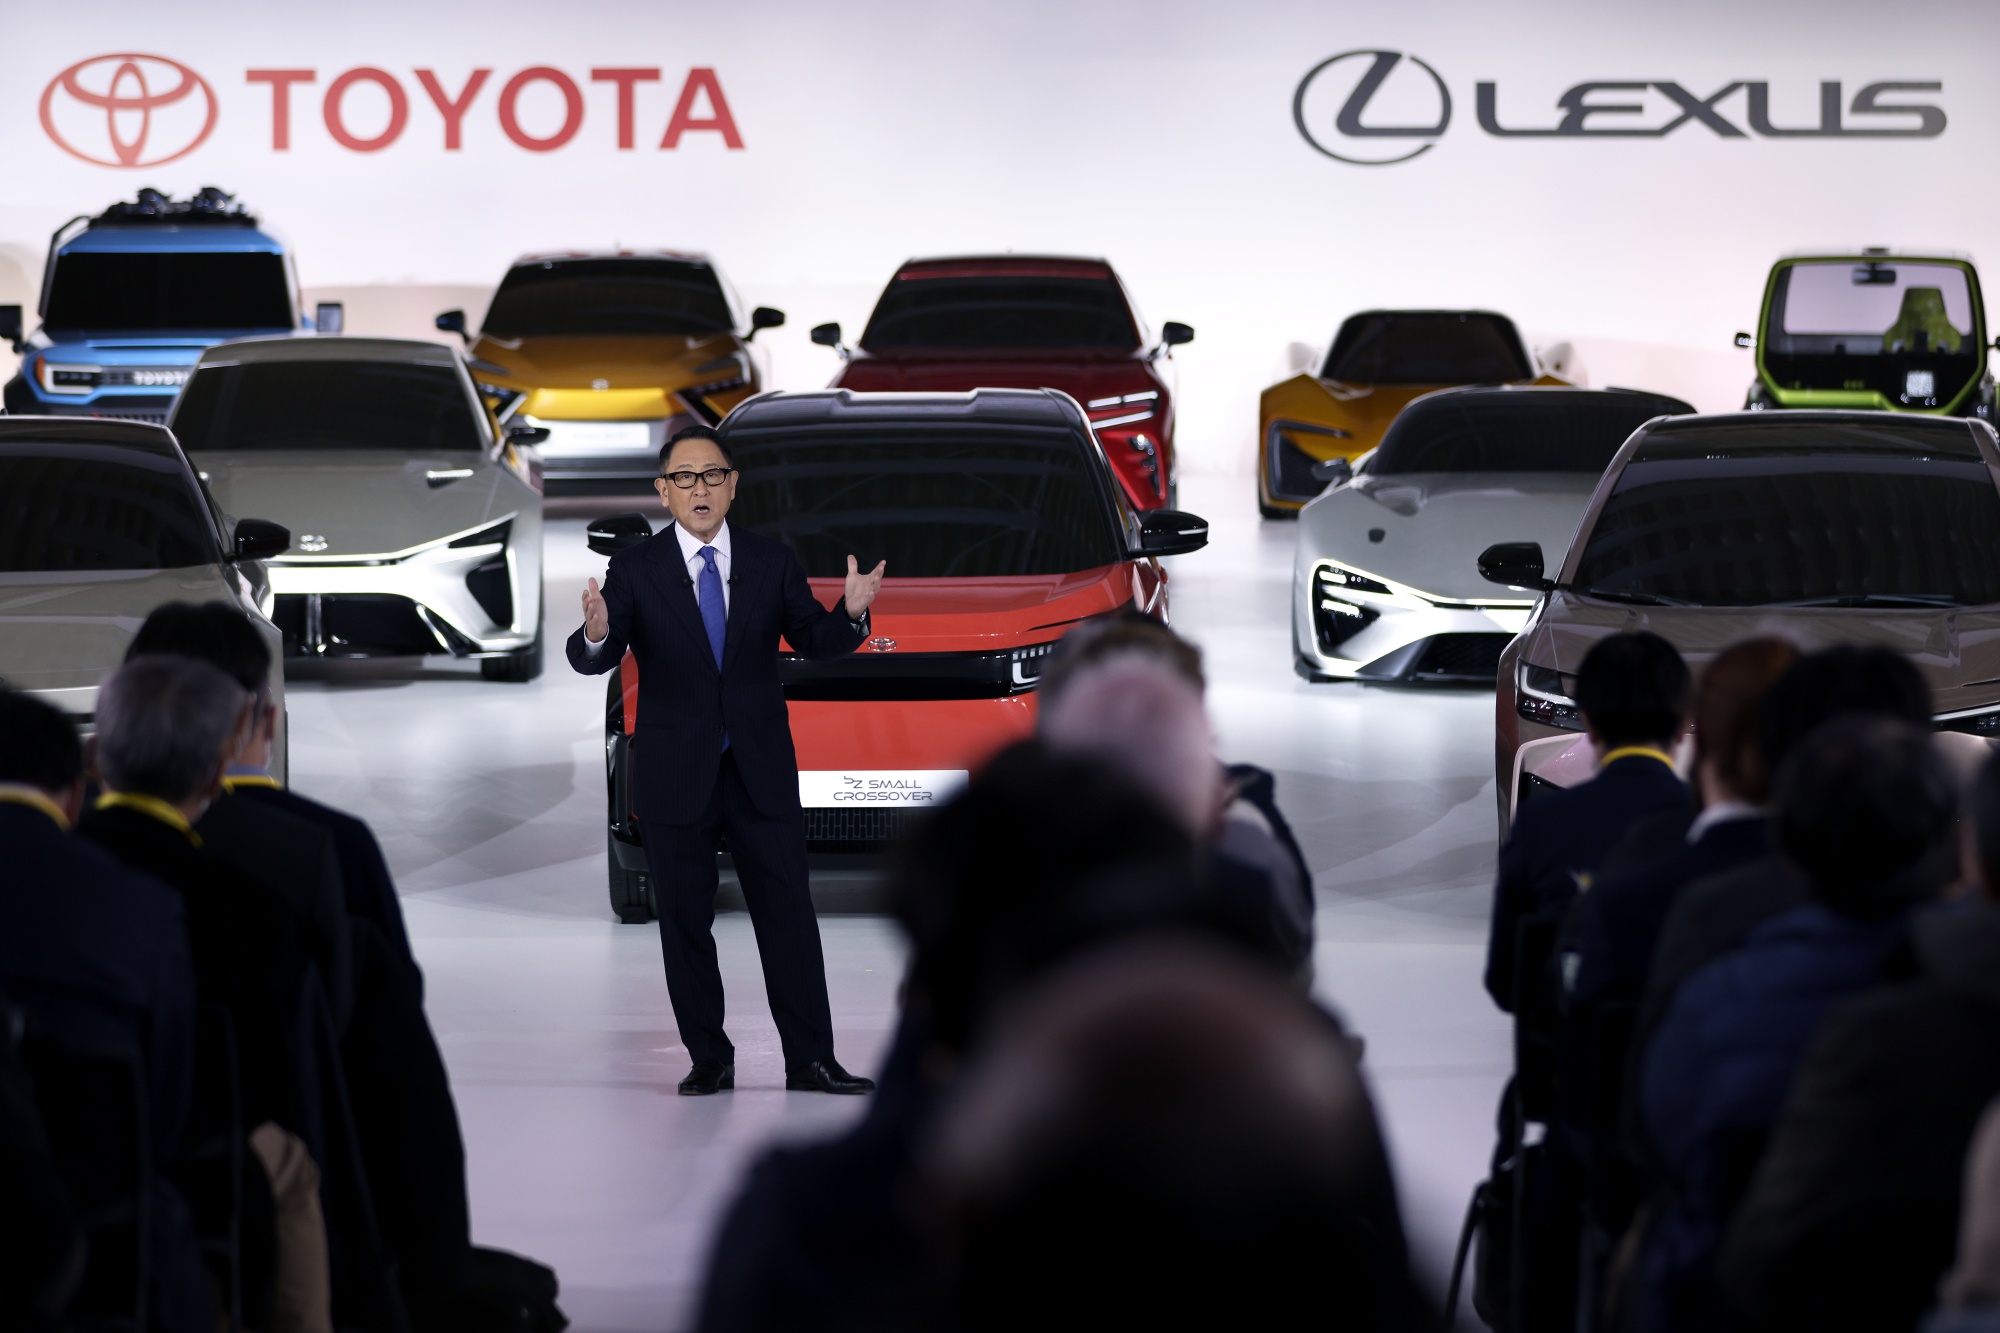 Akio Toyoda speaks during a news conference on Dec. 14.